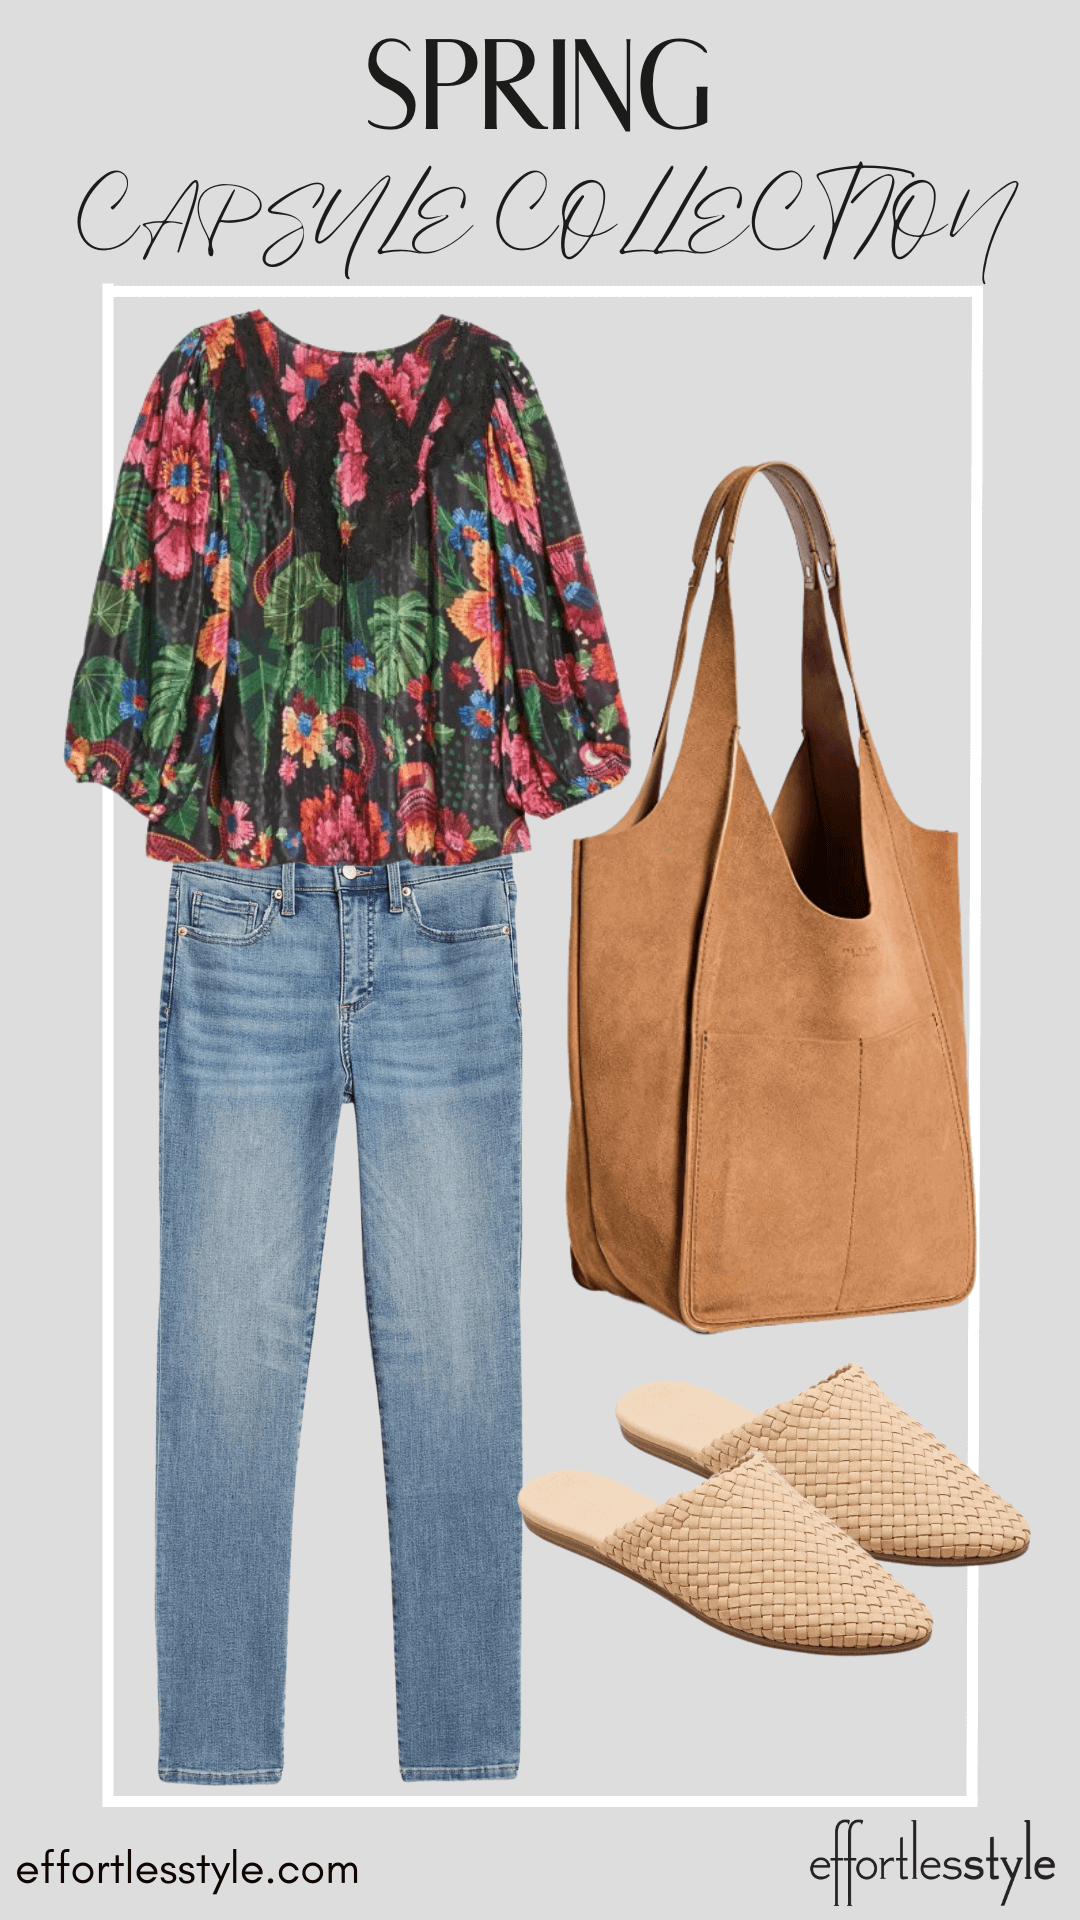 How To Wear Our Spring Capsule Wardrobe - Part 2 Printed Blouse & Light Wash Jeans how to wear mules with jeans how to style mules this spring affordable mules for spring the best shoes for spring